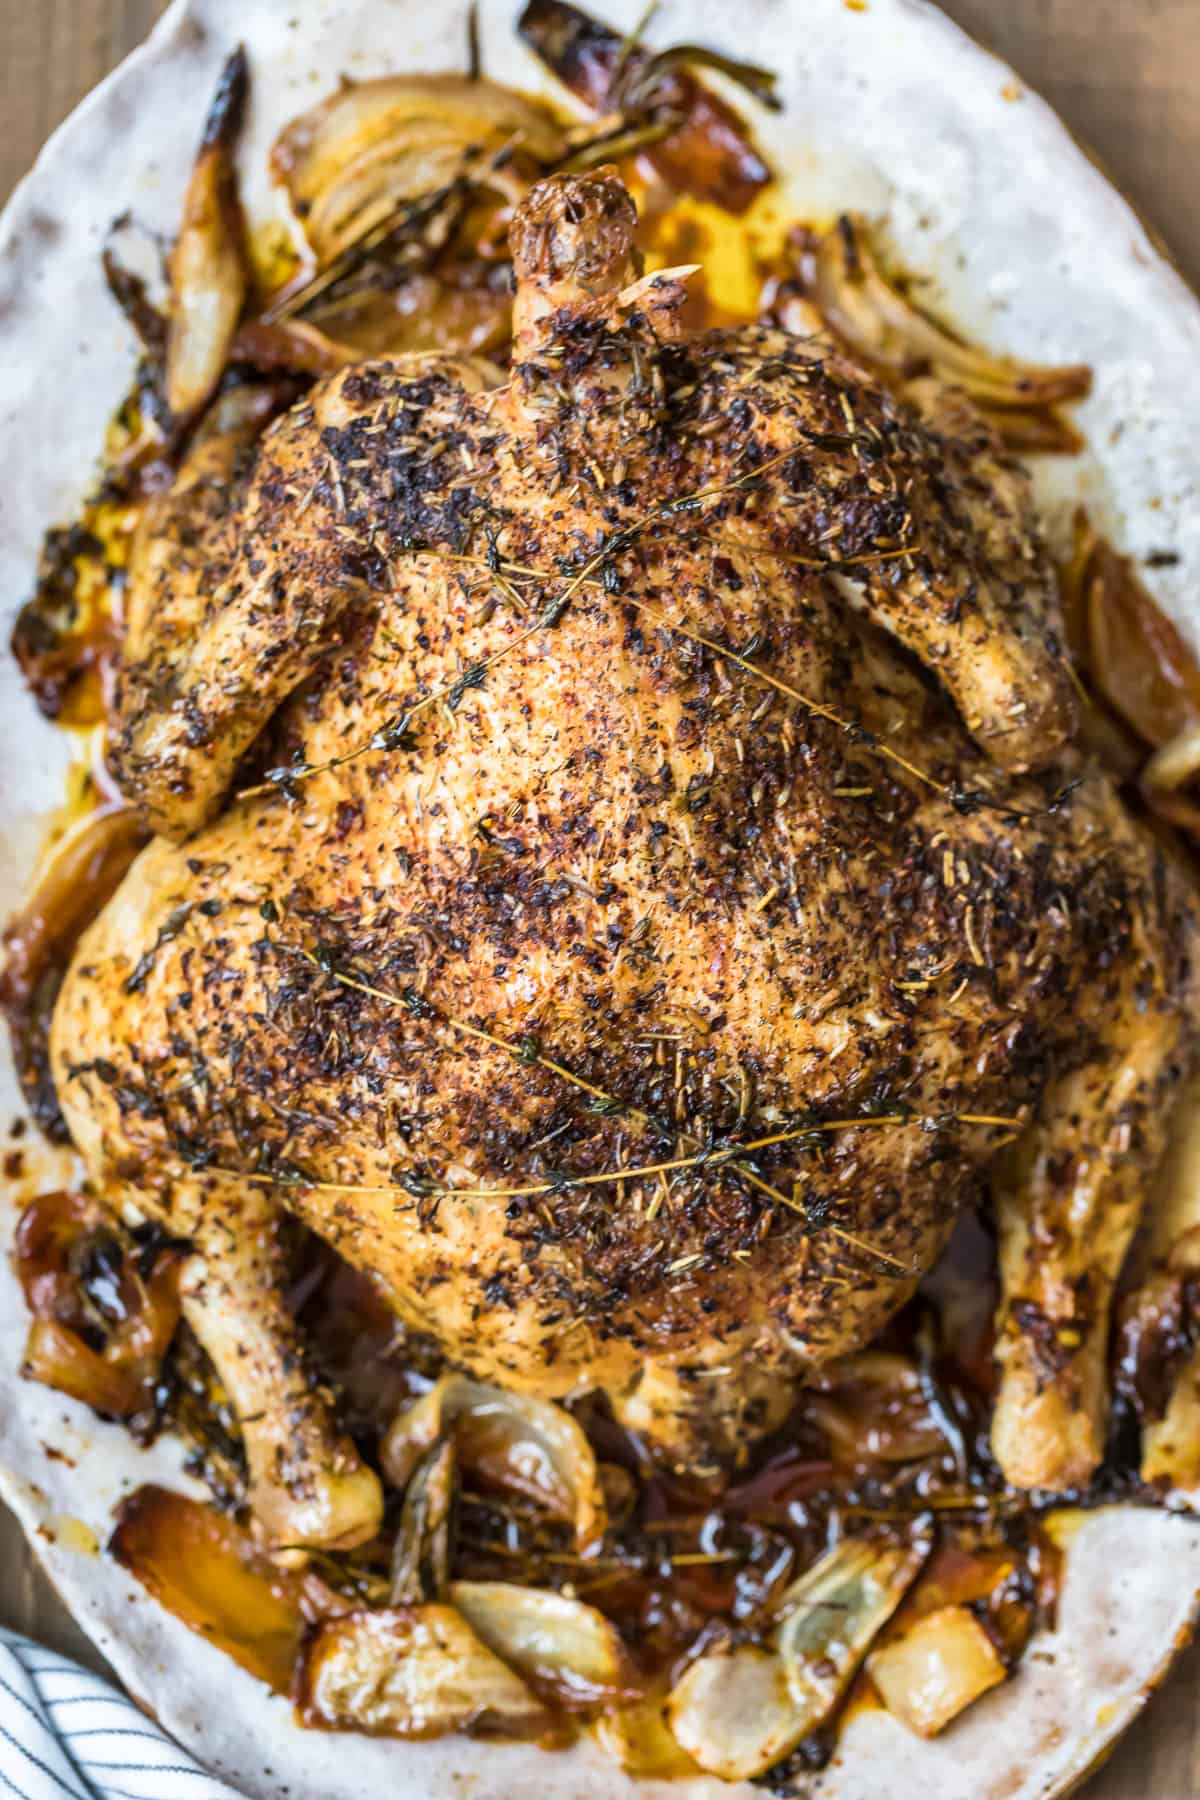 A whole roast chicken with herbs de provence on a white platter